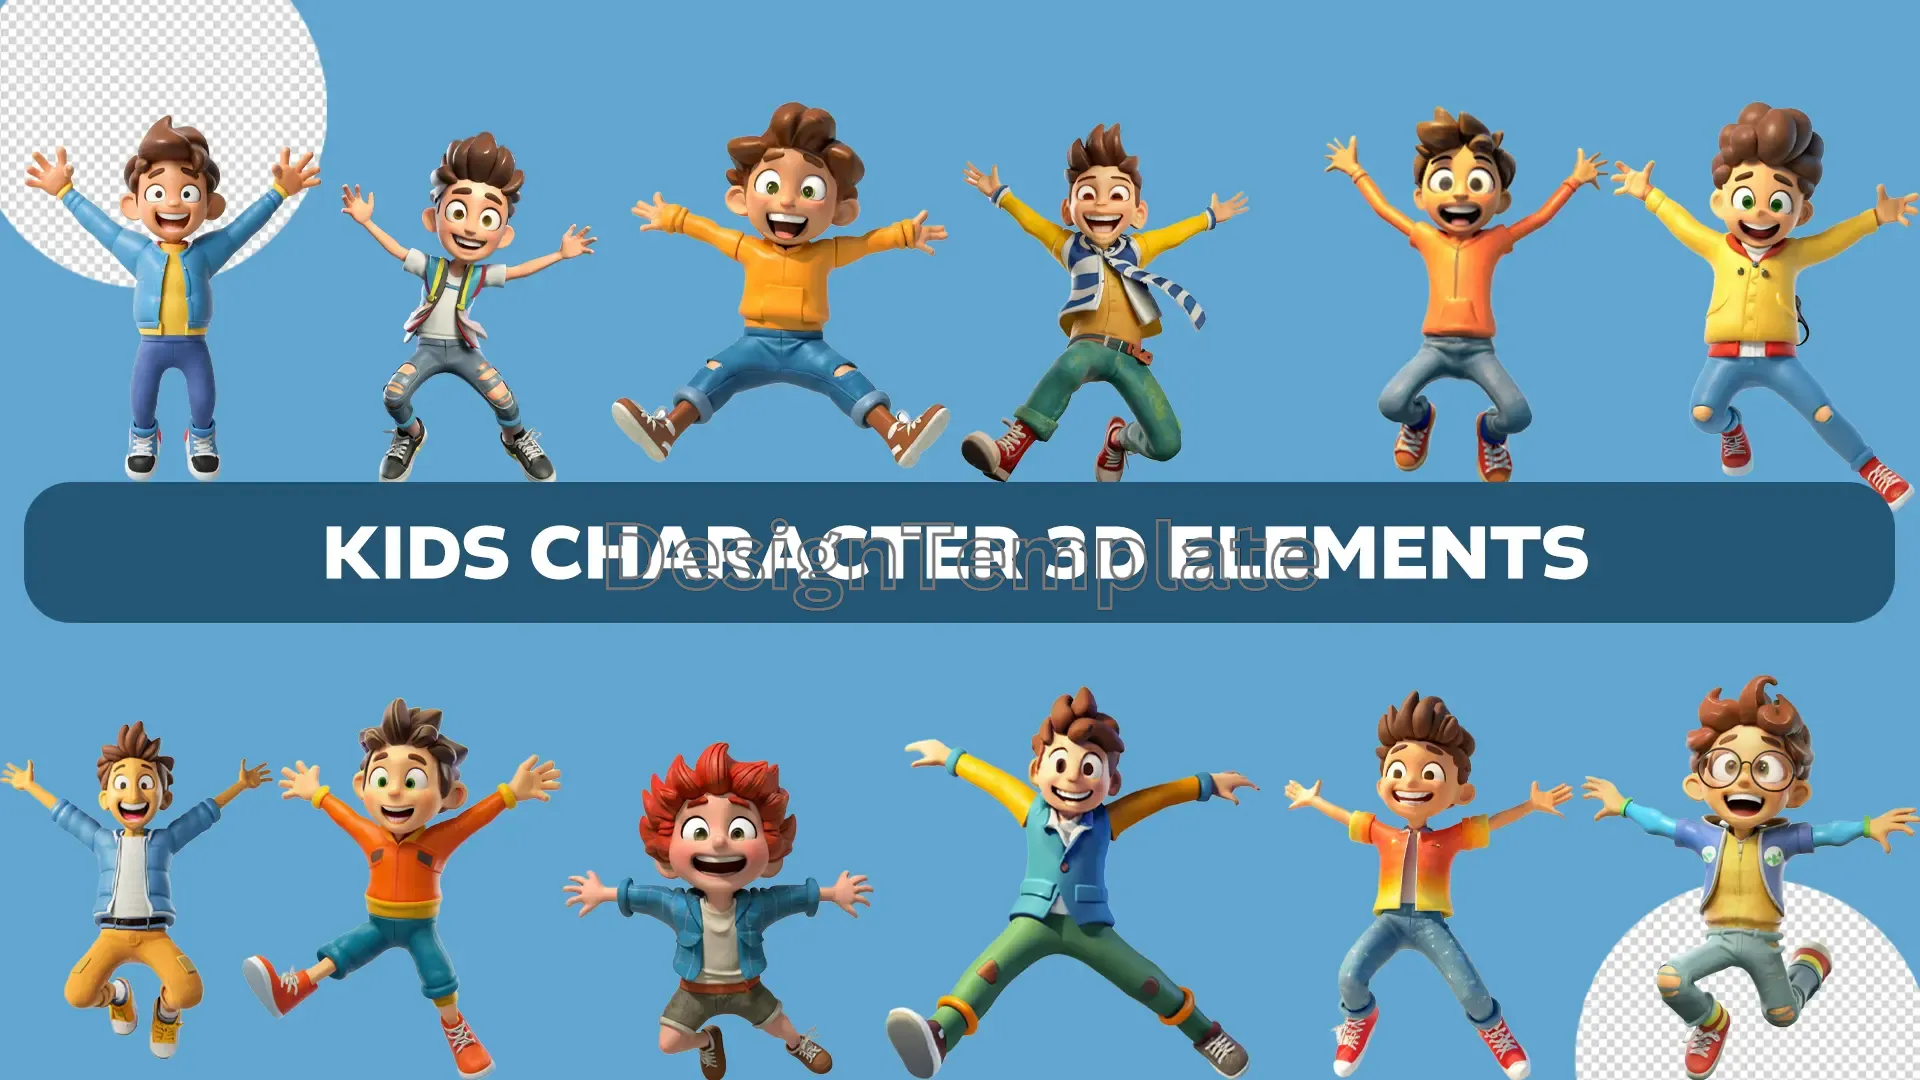 Playground Pals Kids Character 3D Elements Pack